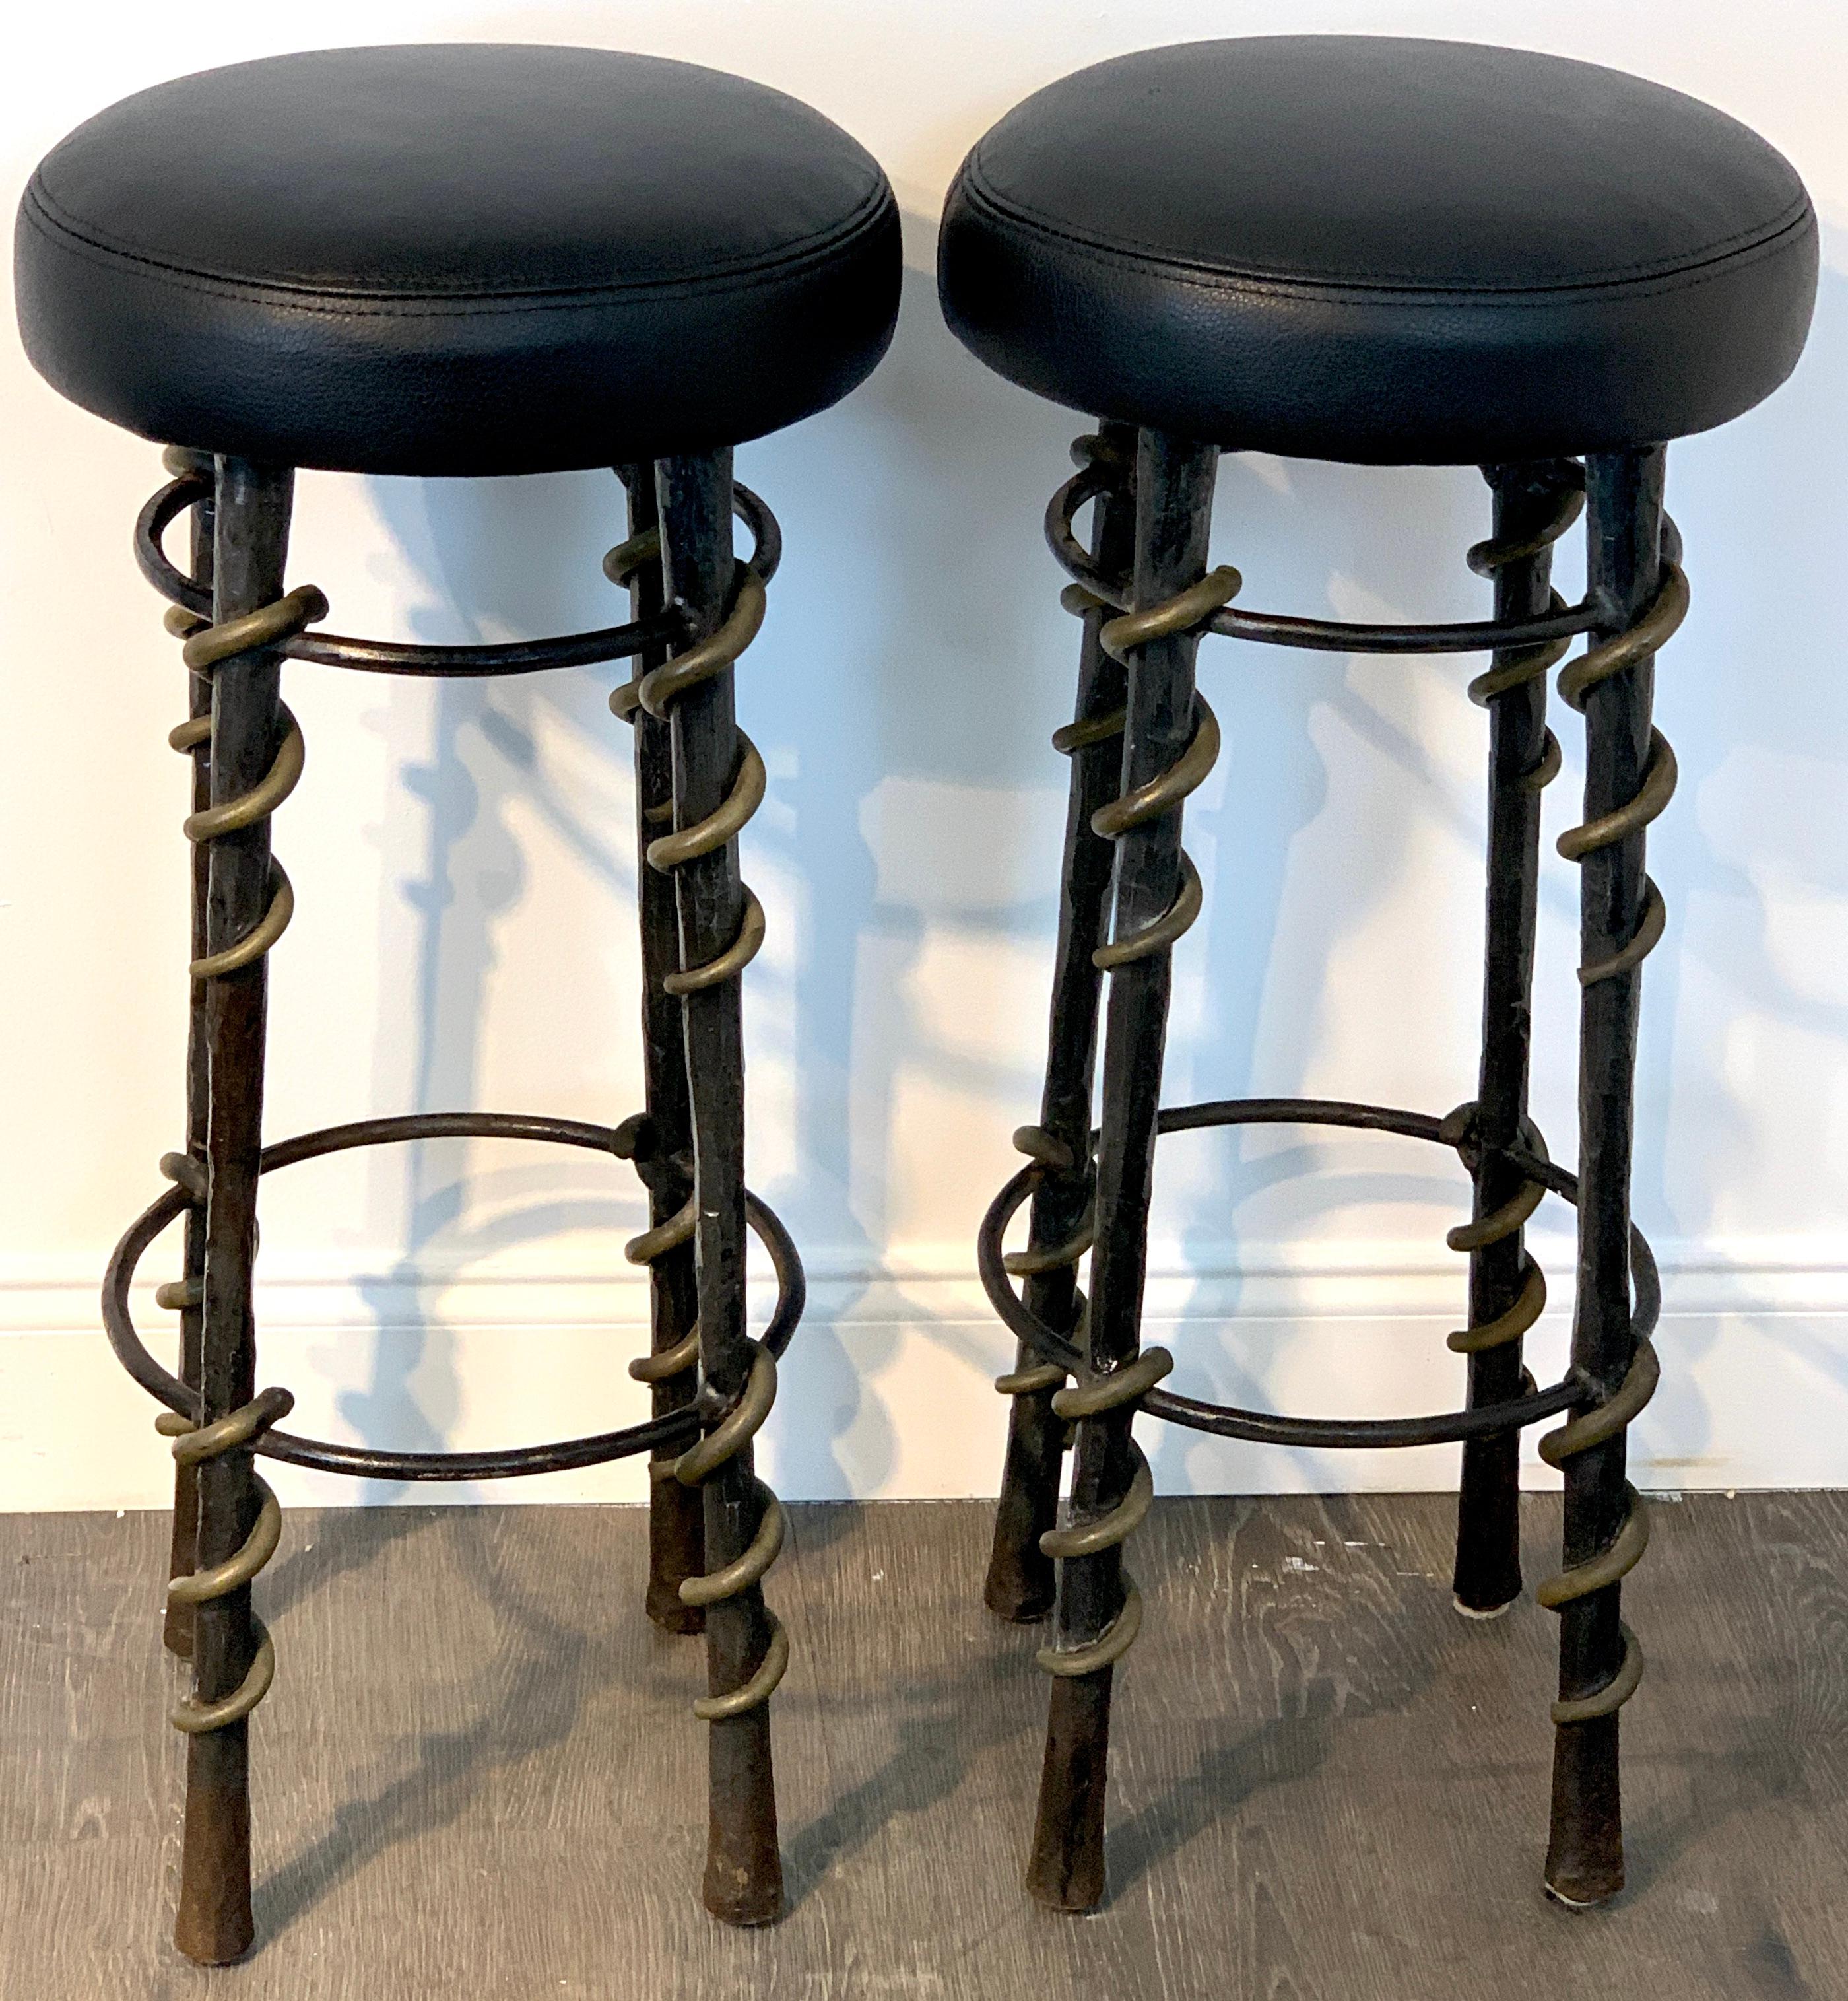 Pair of 'Cobra' stools by Karl Springer, A rare form, each one upholstered in calfskin black leather, handmade of wrought iron and bronze. 

Provenance: Acquired directly from Karl Springer Personally. Original tear sheet included. 
 